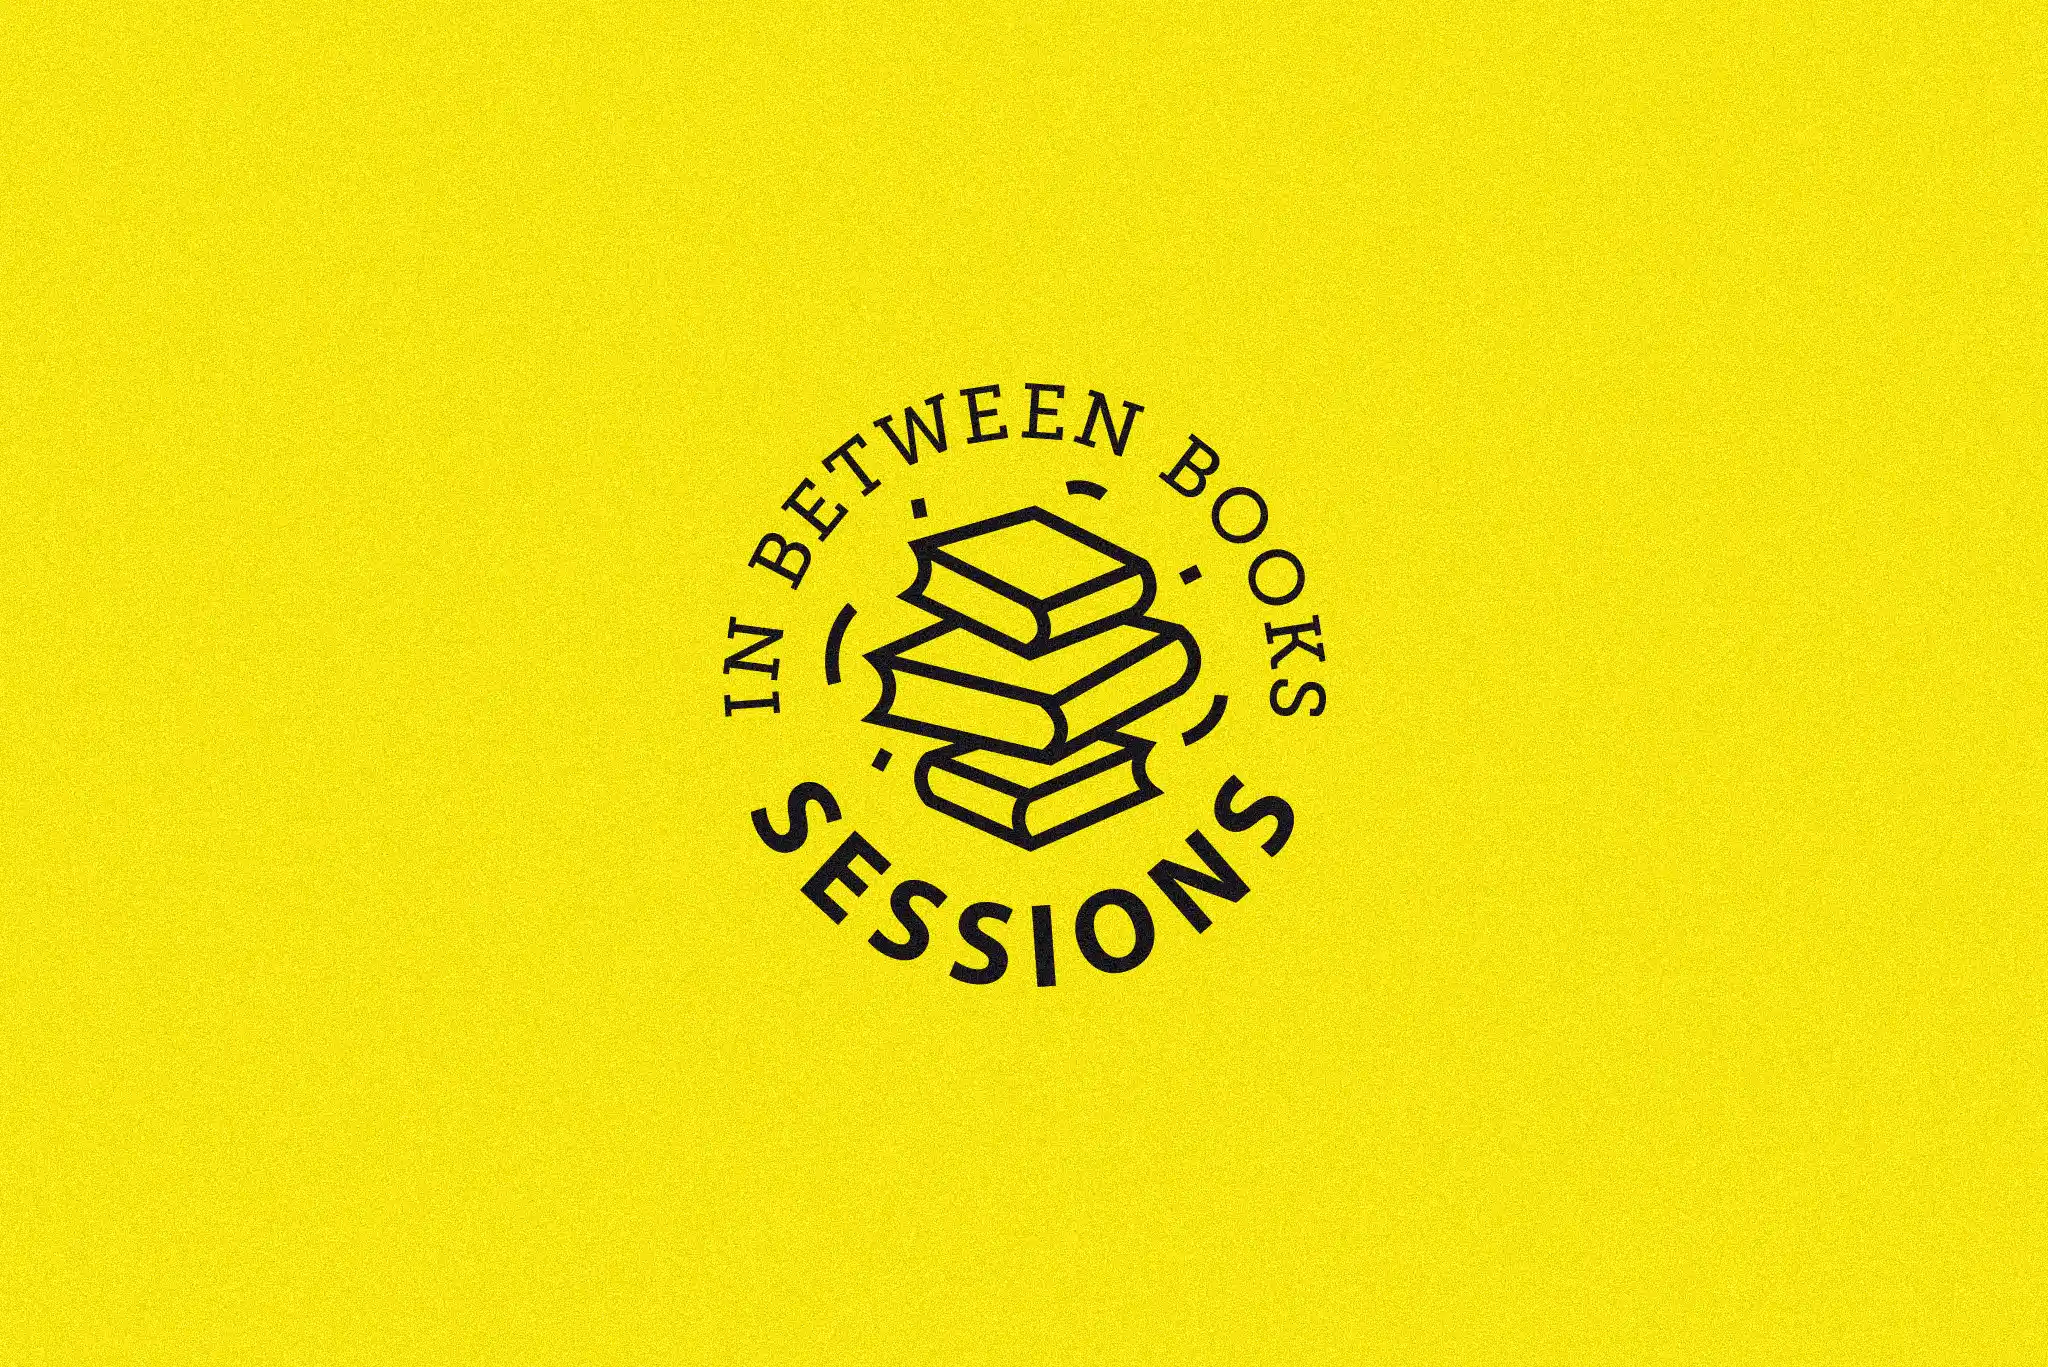 In Between Books Sessions Logo